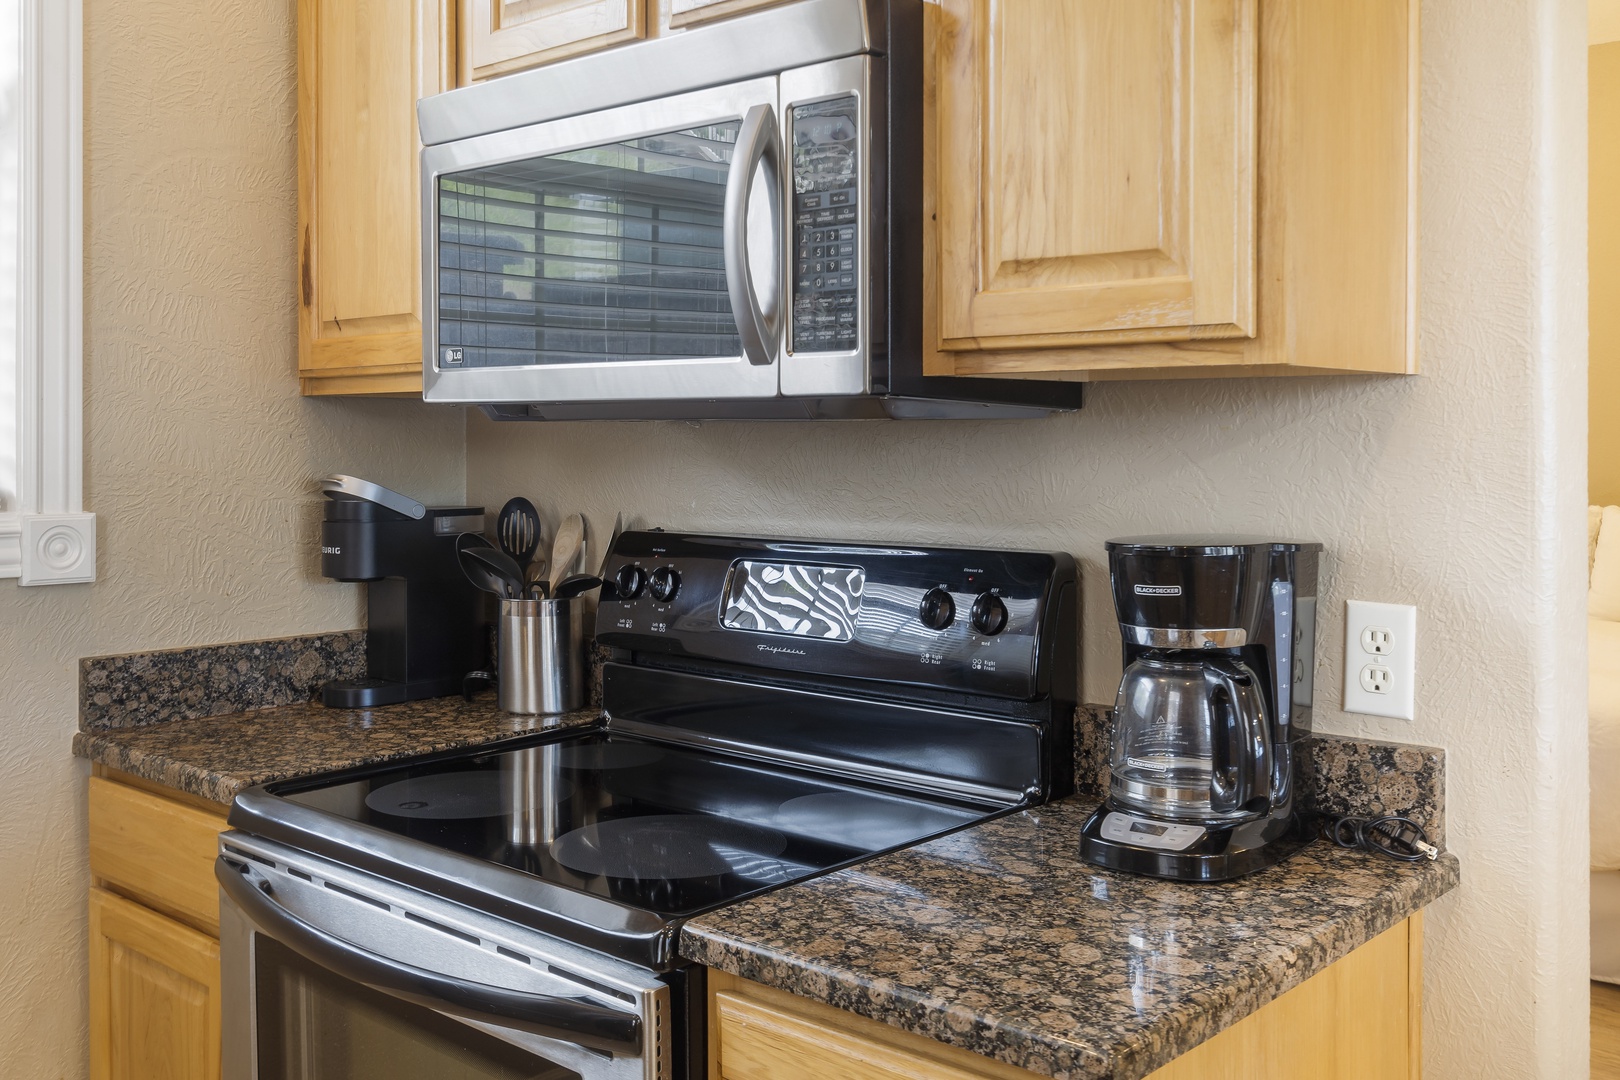 Kitchen is equipped with coffee pot, toaster and more